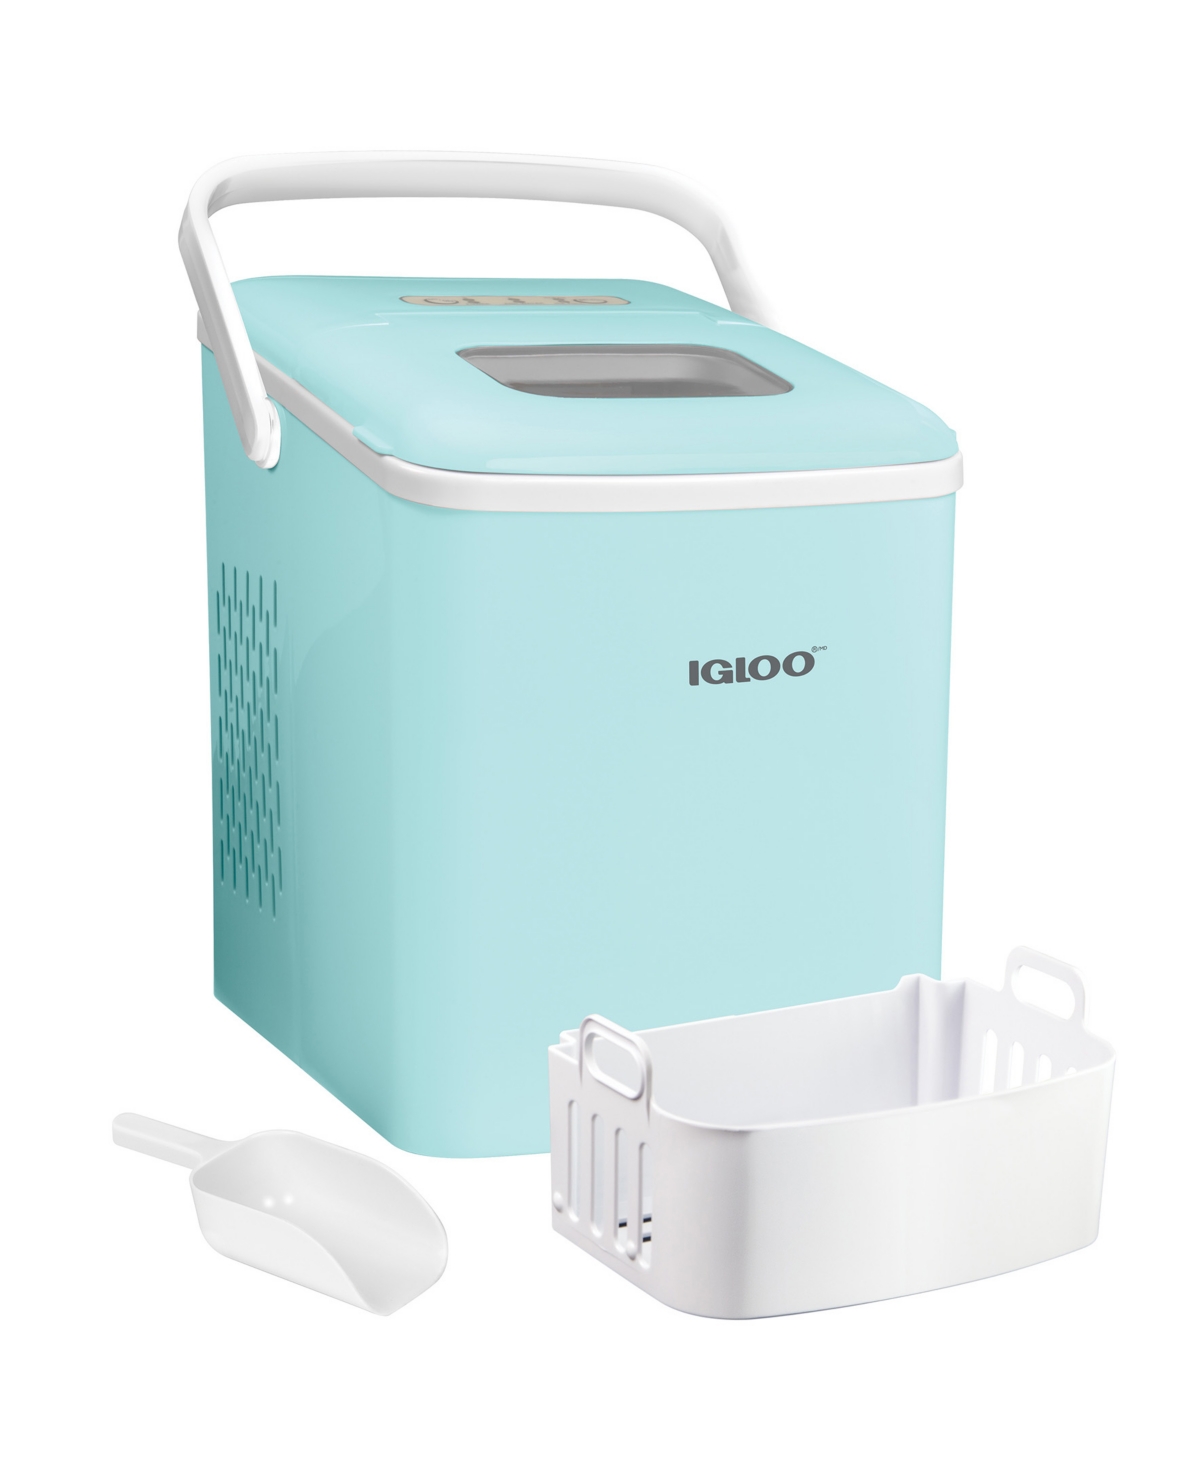 Igloo 26 Pound Automatic Self-cleaning Portable Countertop Ice Maker Machine With Handle Igliceb26hnaq In Aqua